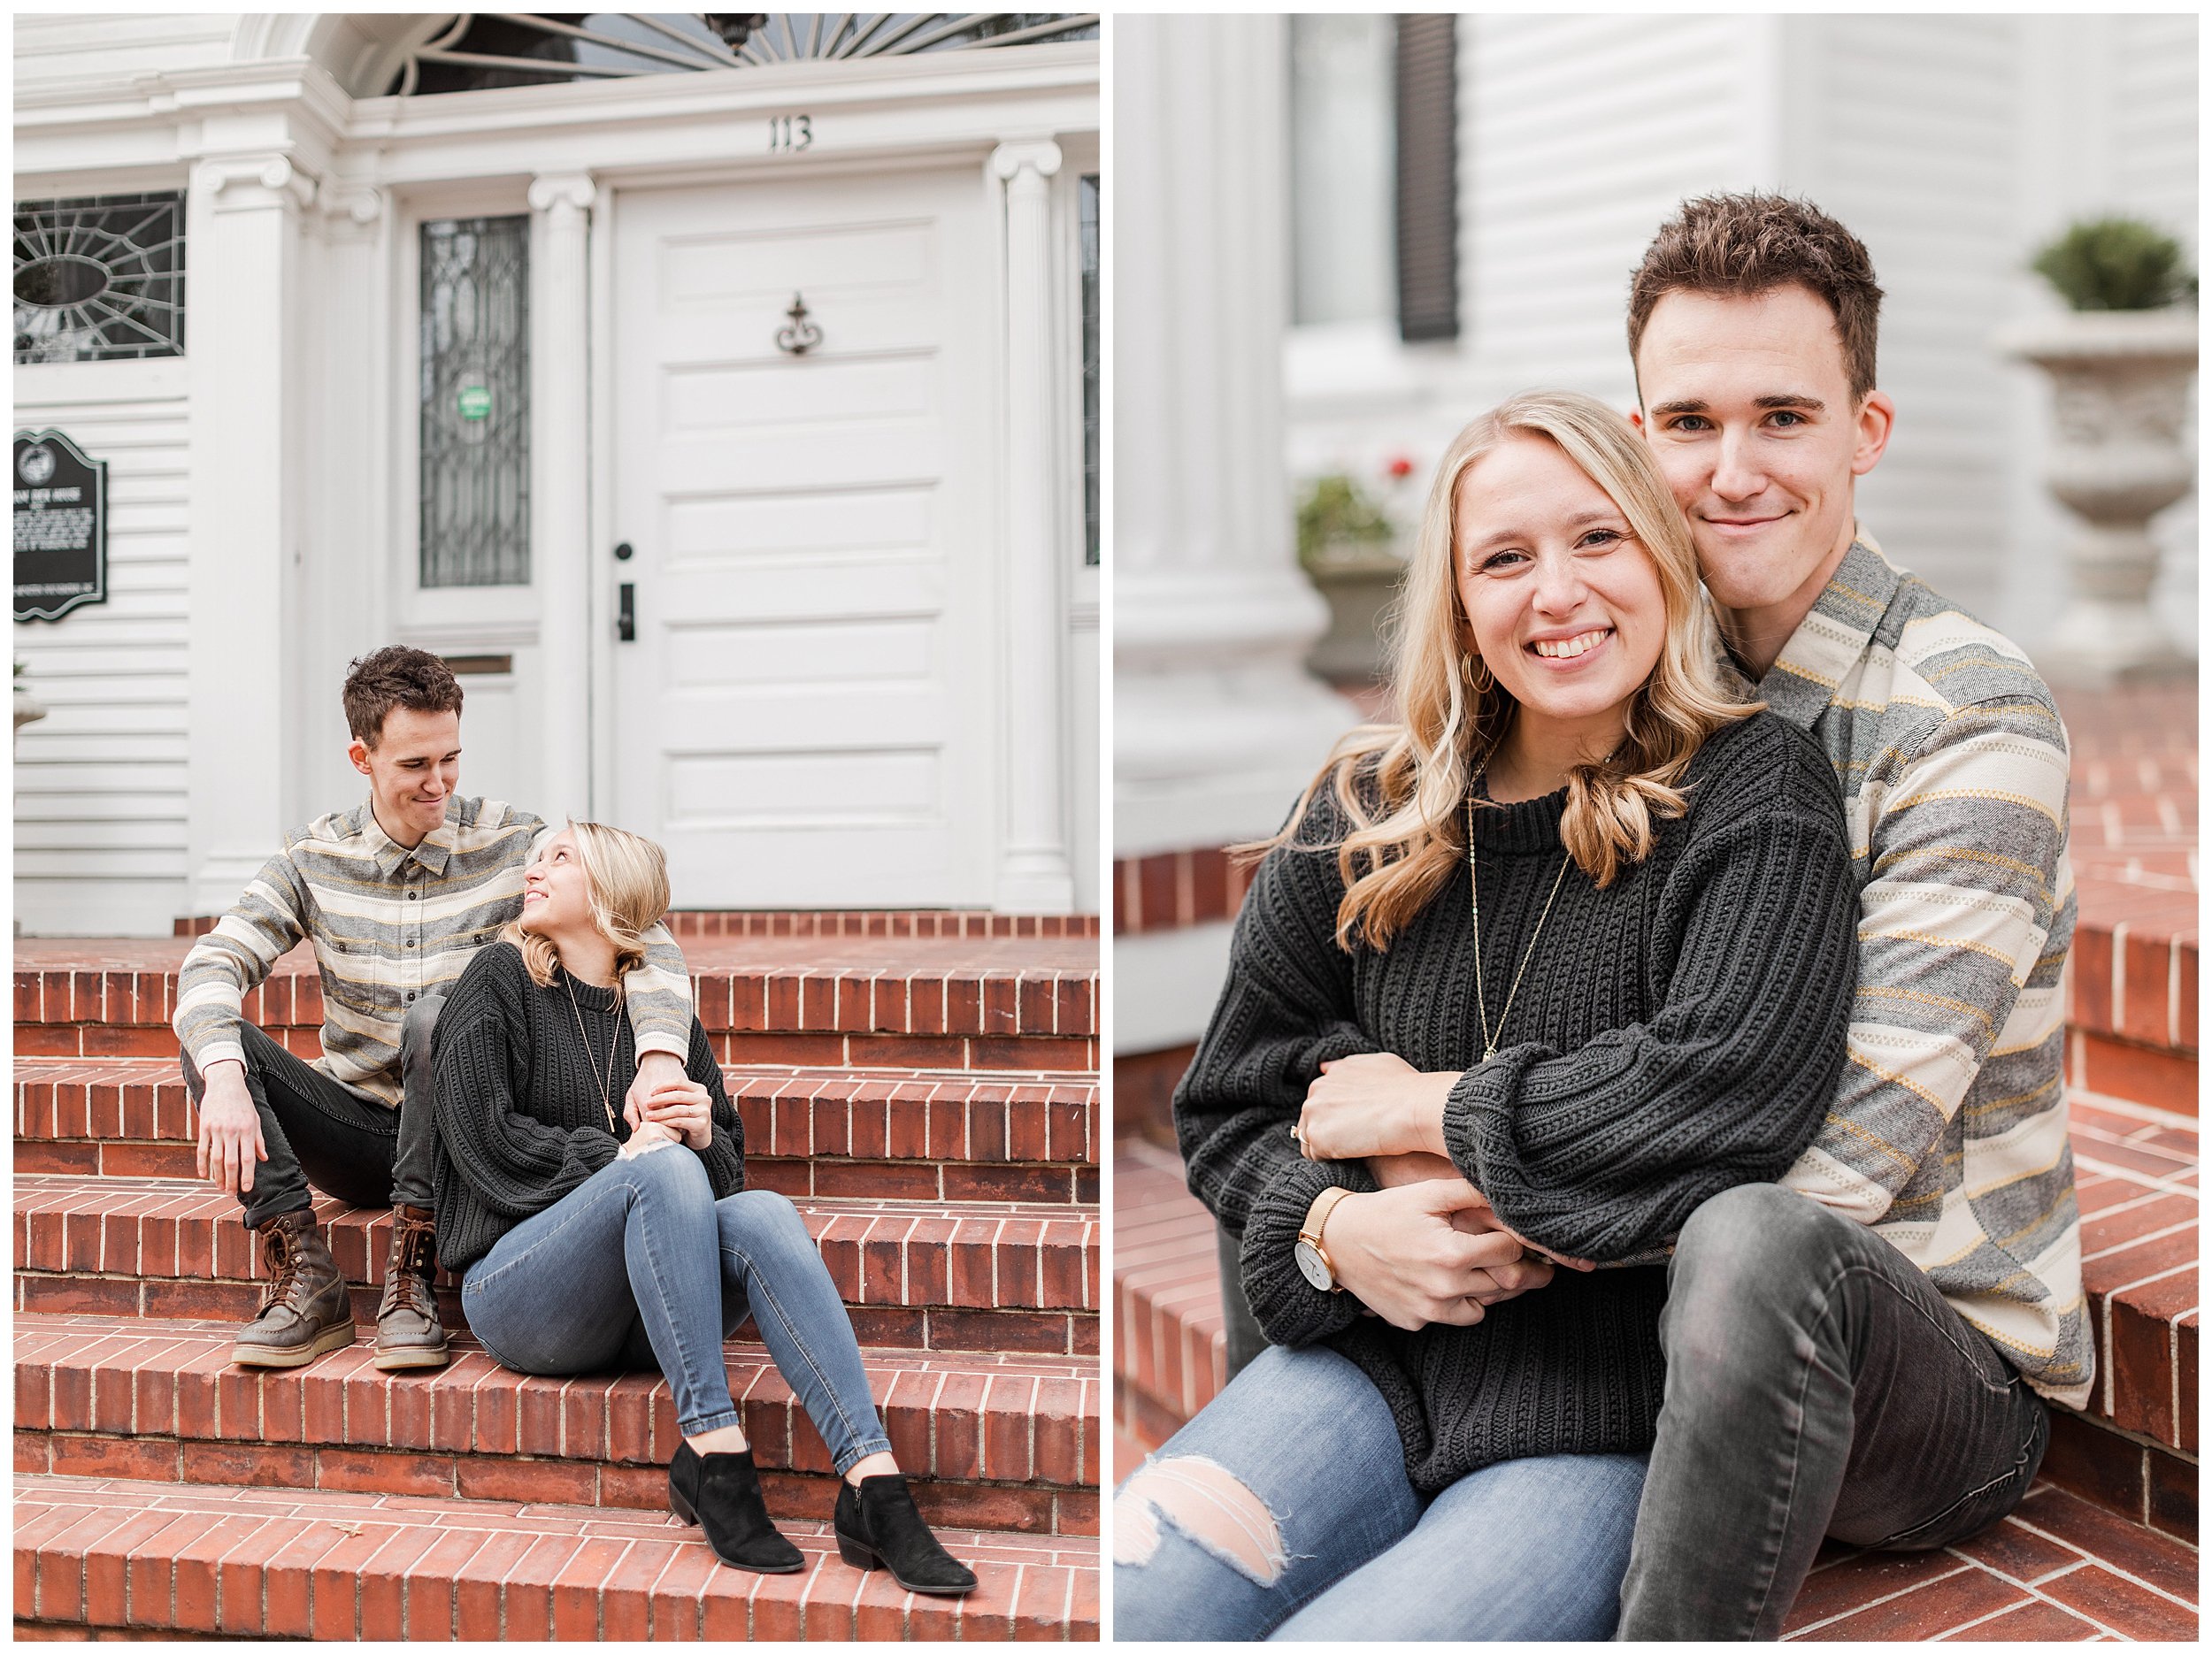 wilmington riverwalk and historic district engagement session ashley christ photography wilmington wedding photographer_0060.jpg